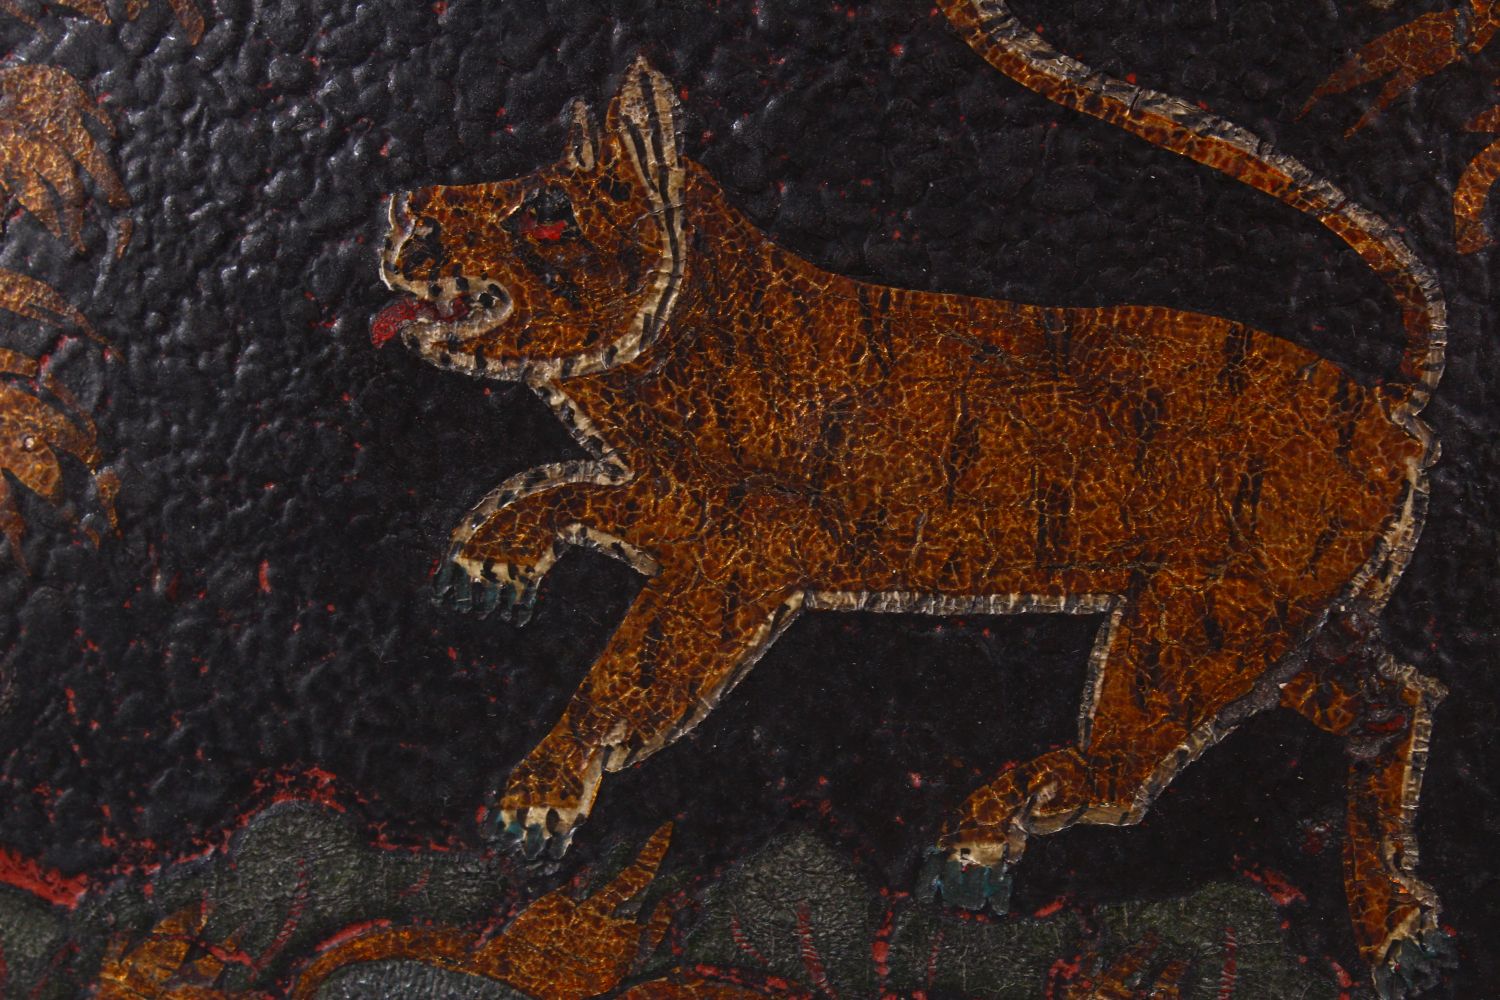 A FINE 18TH/19TH CENTURY INDIAN PAINTED LACQUER LEATHER SHIELD, decorated with a band of tigers, - Image 7 of 10